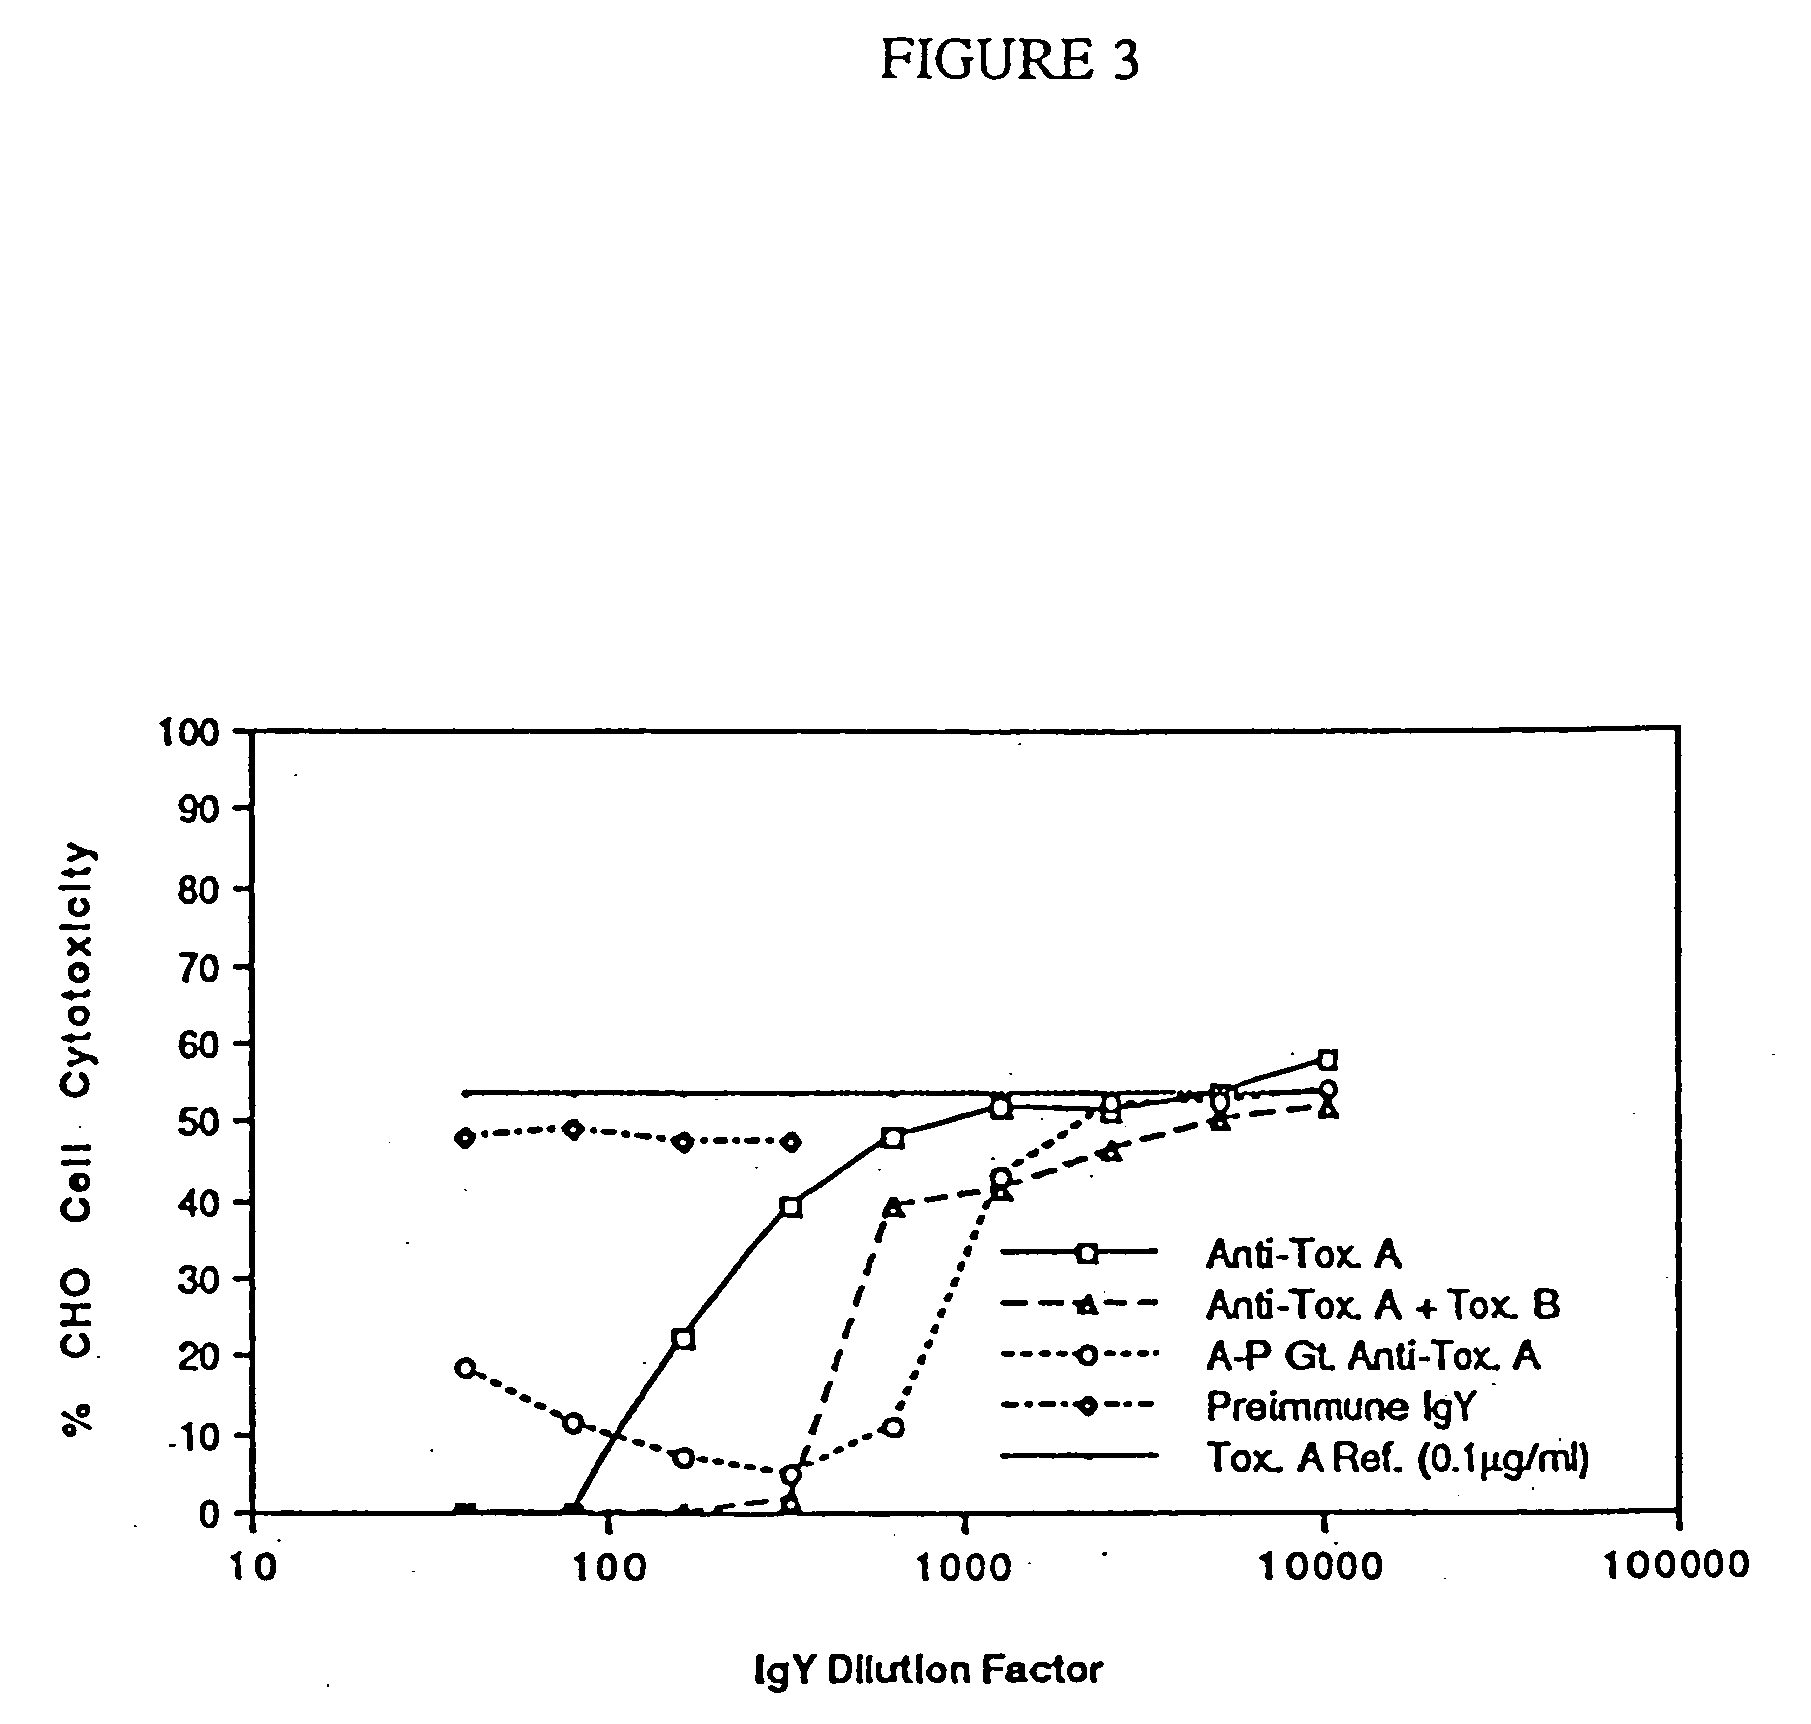 Soluble recombinant botulinum toxin proteins